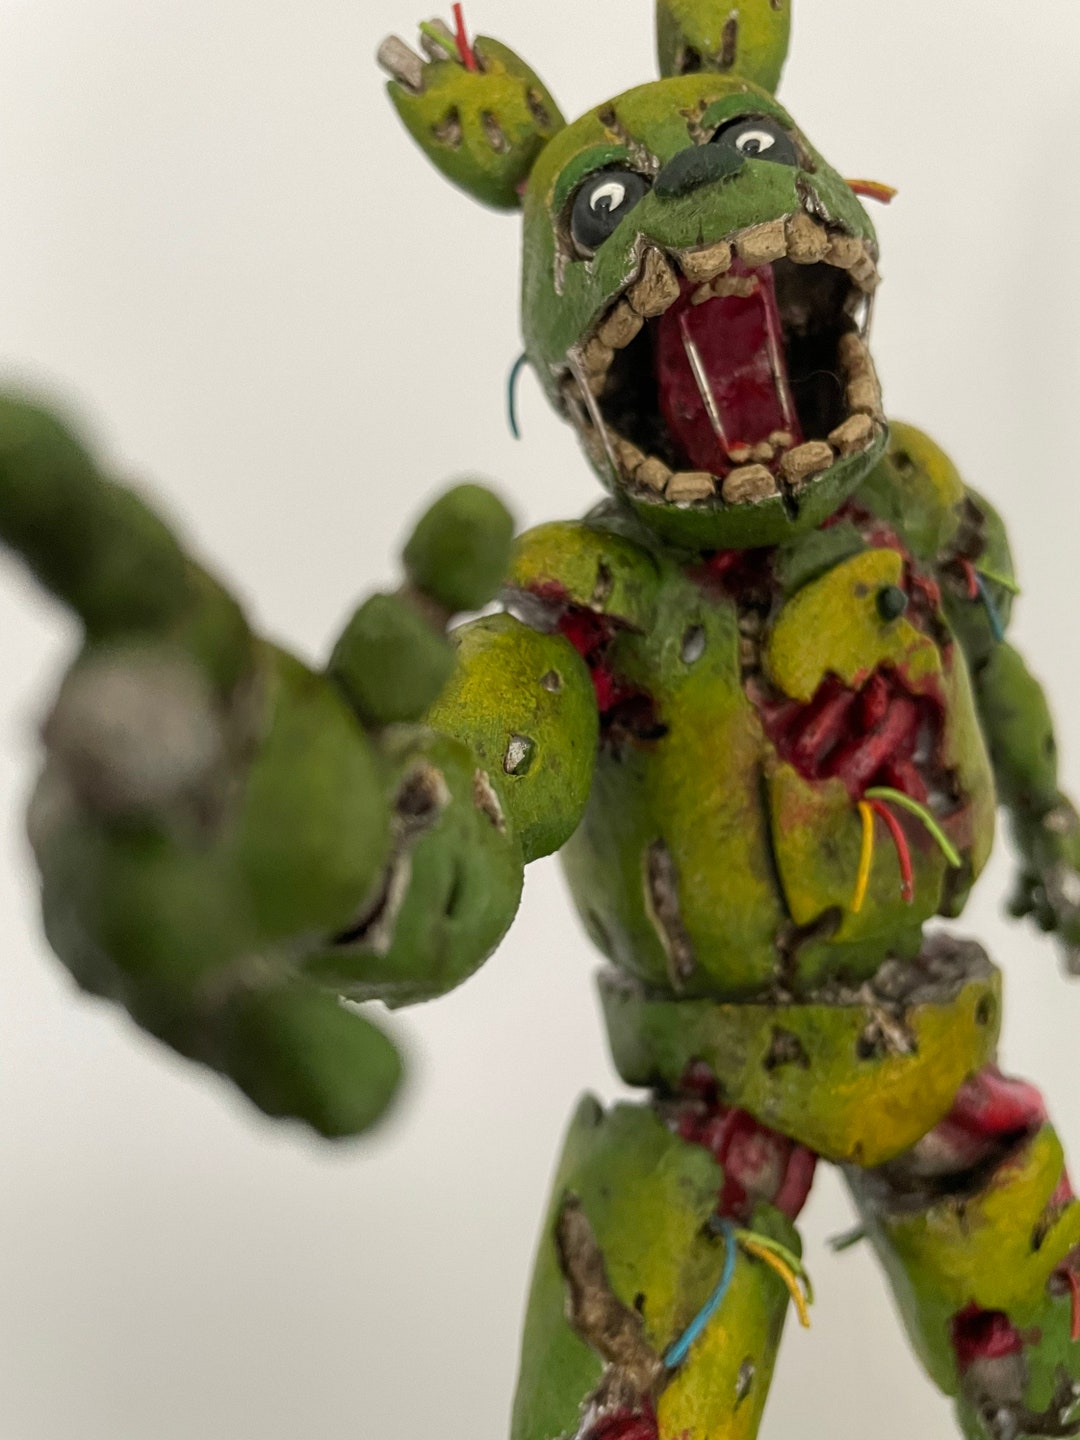 Five Nights at Freddys Springtrap Figure and Base. 